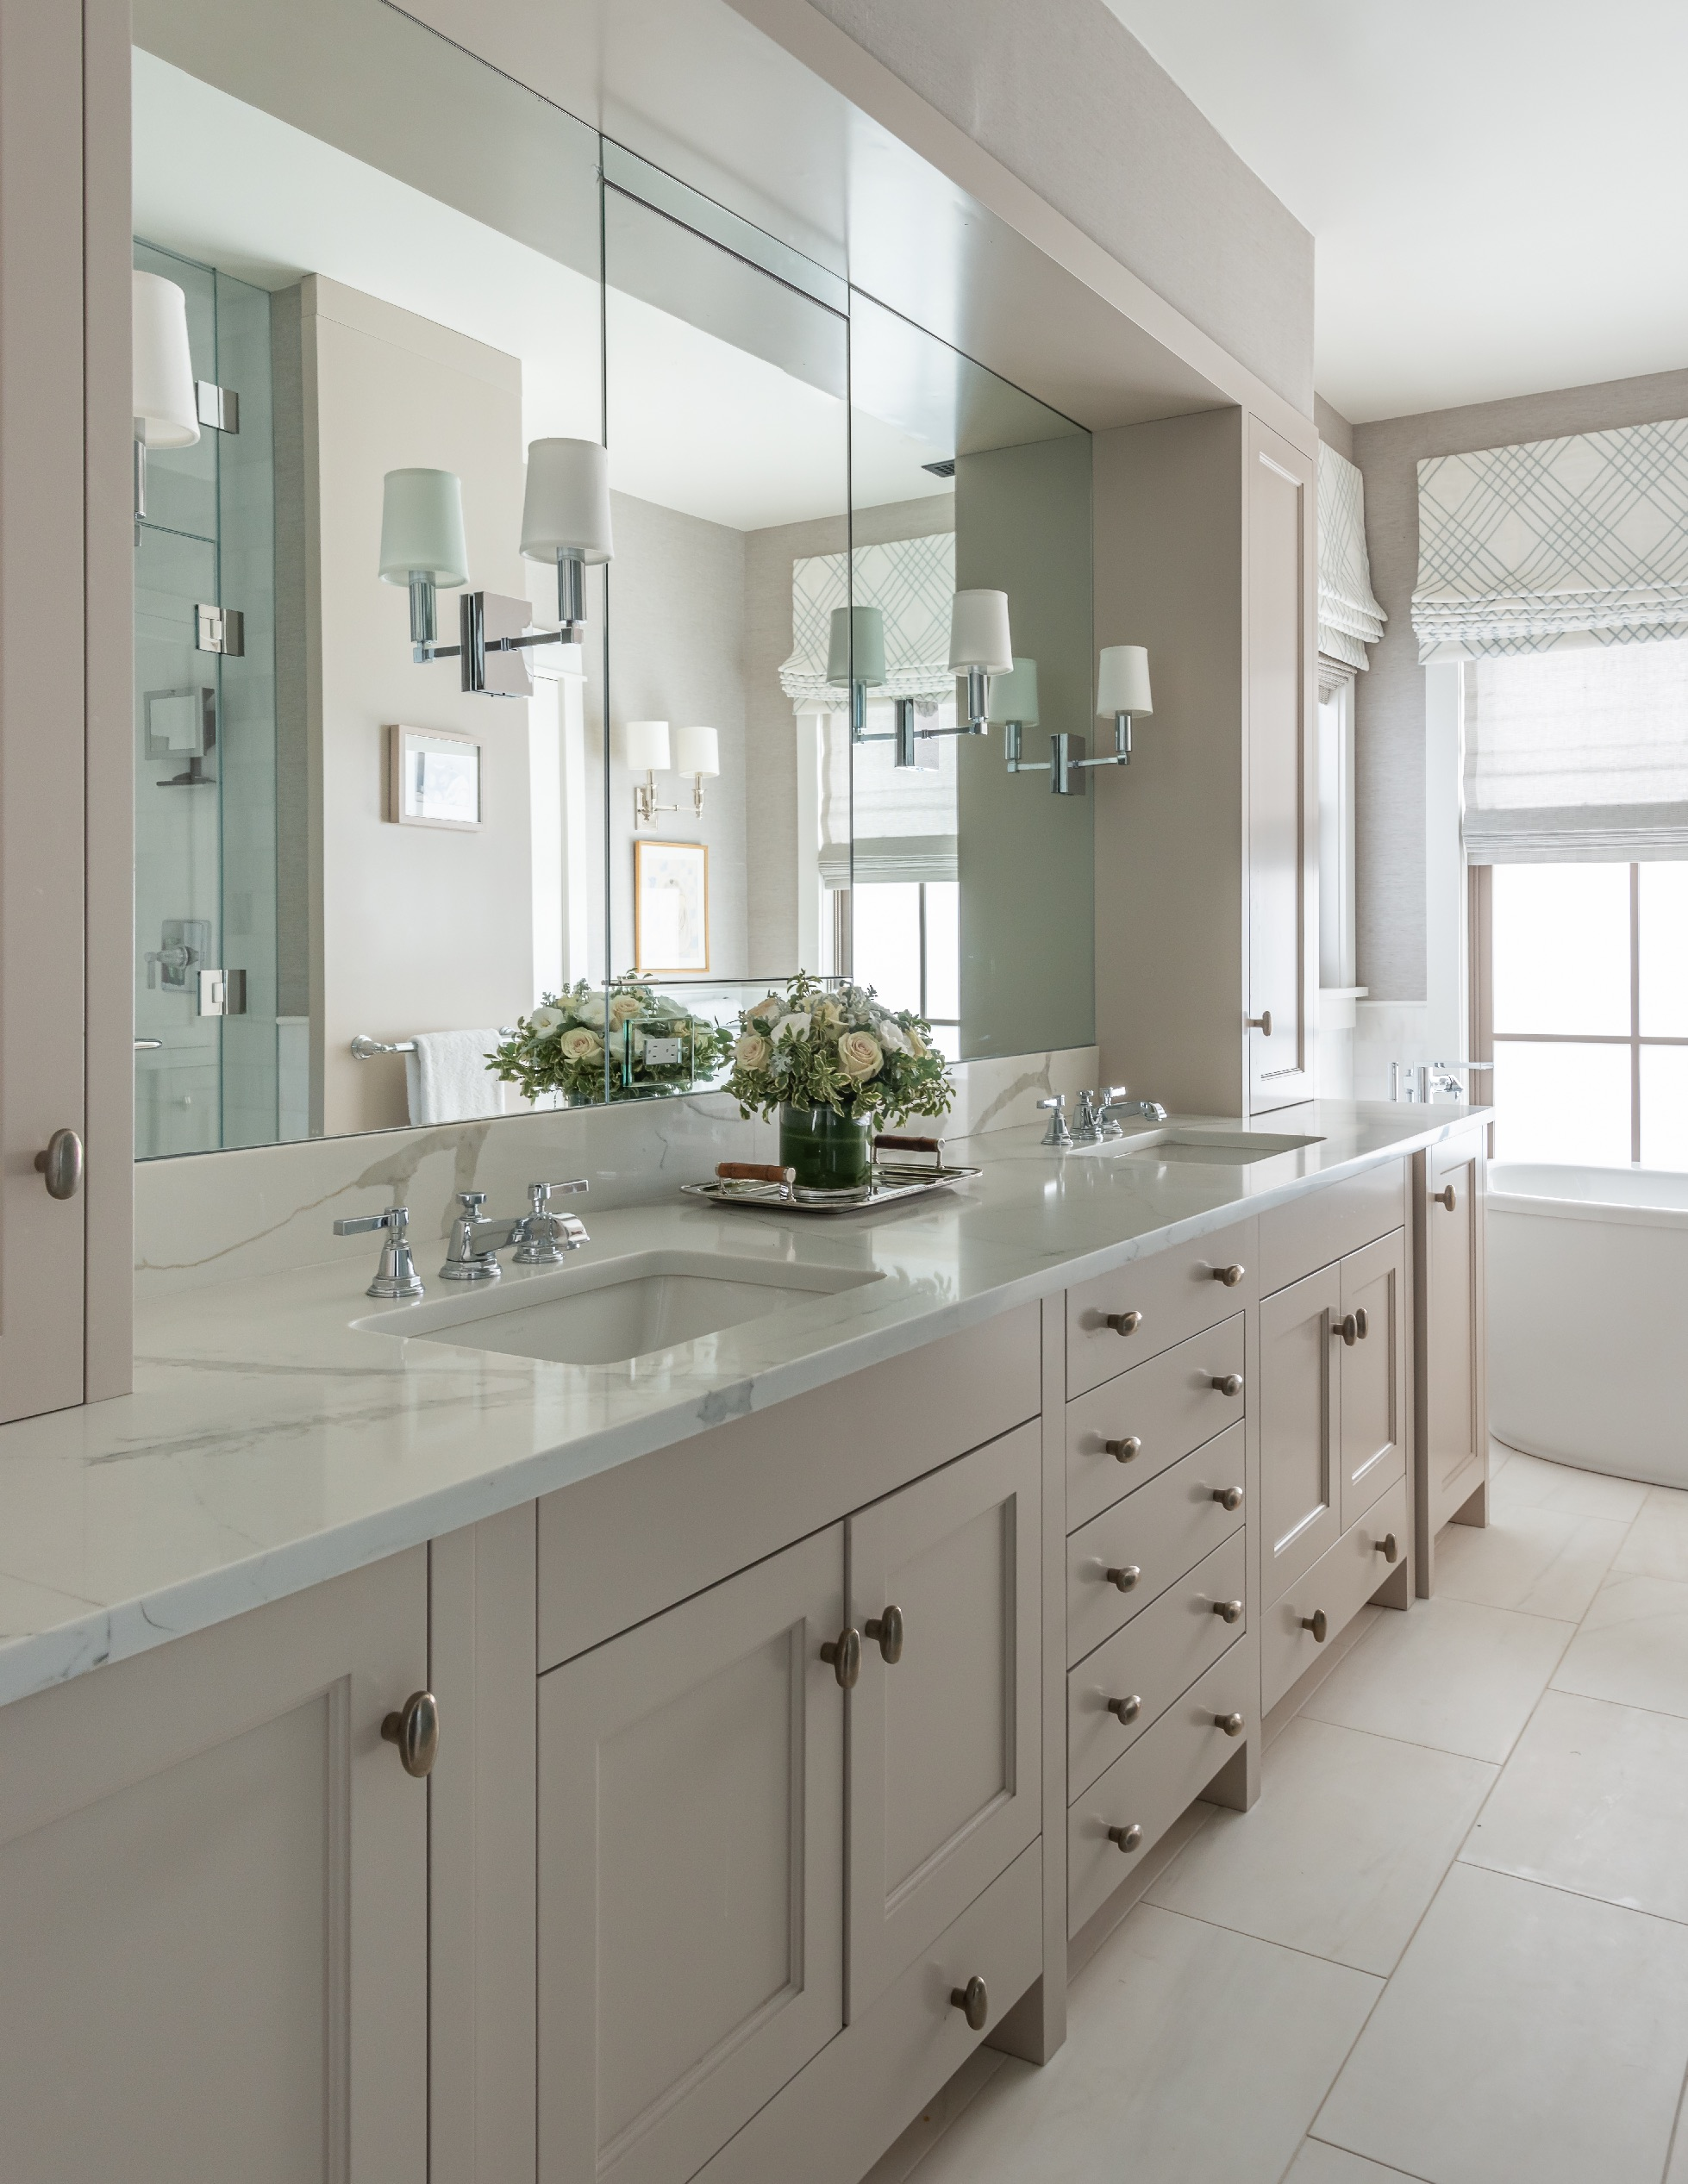  Contemporary Transitional Vacation Home Bathroom. Snedens Landing Residence by Alan Tanksley, Inc..